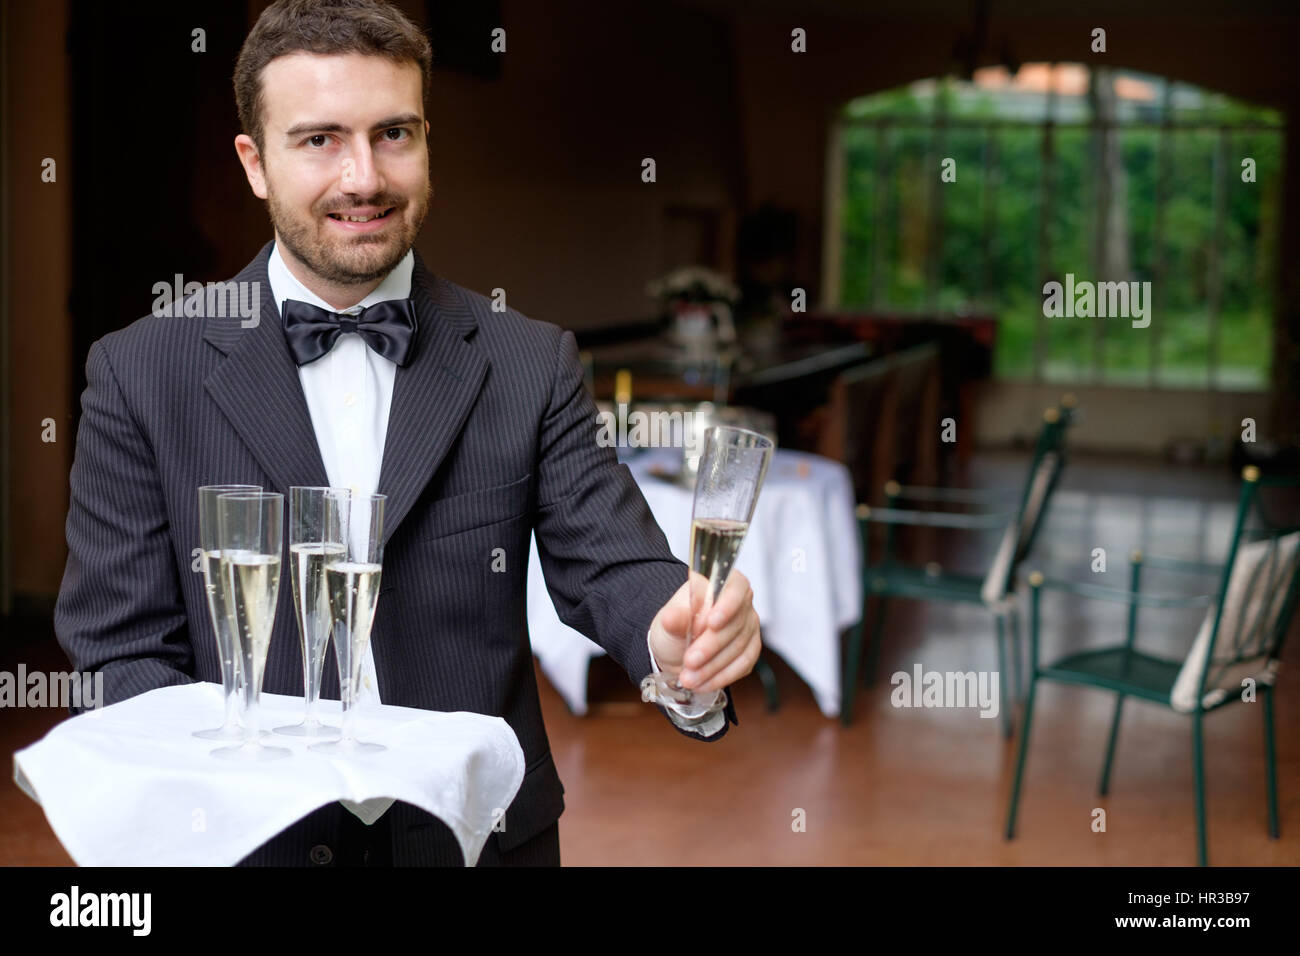 Waiter in formal dress serving champagne Stock Photo